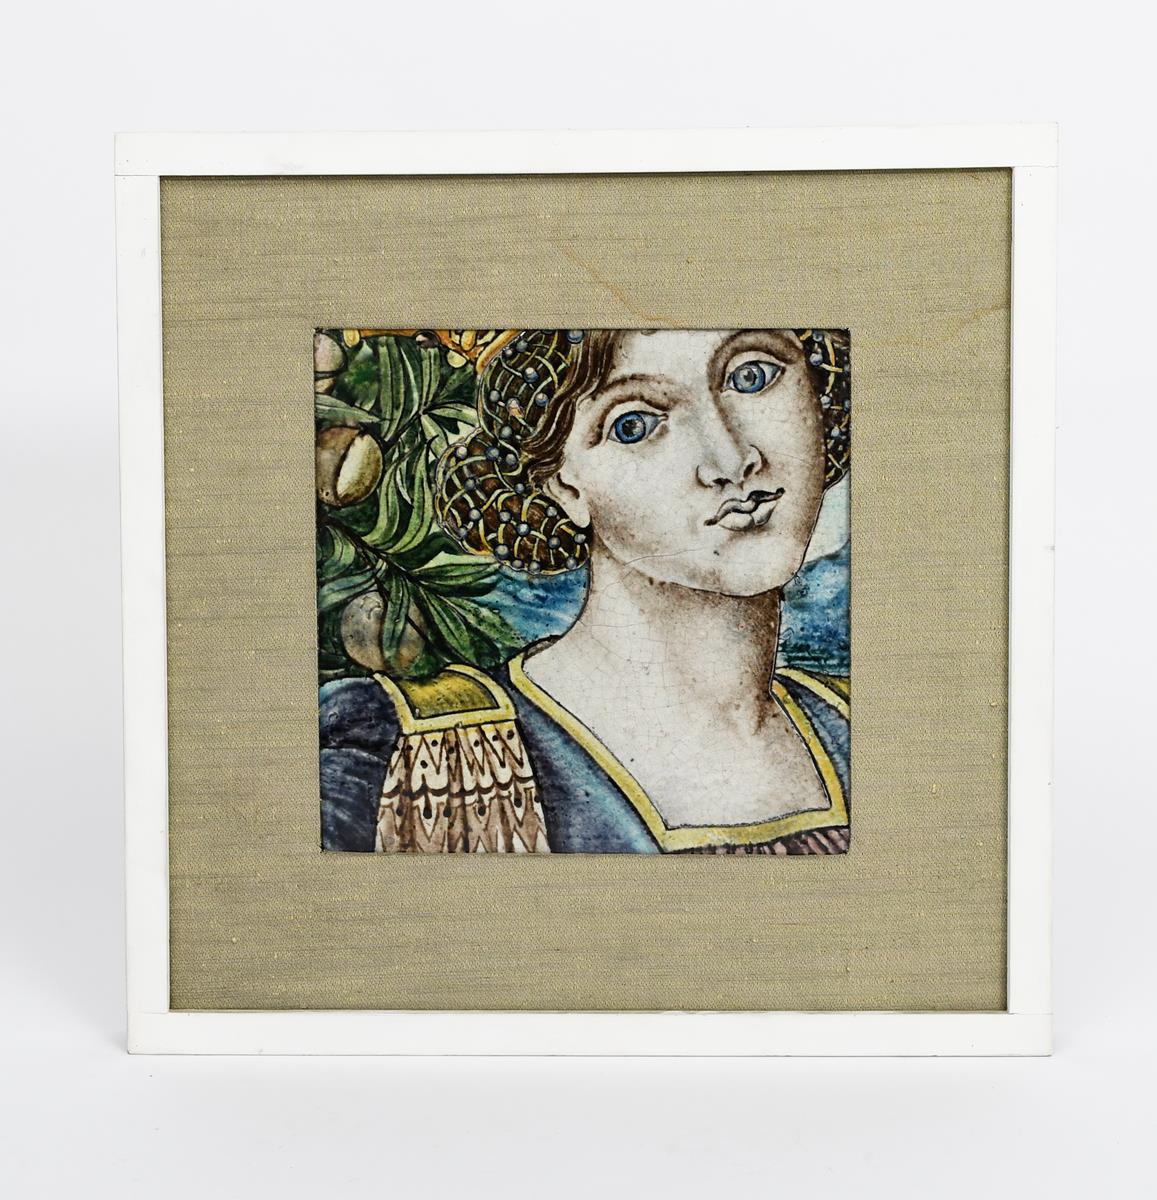 A rare large William De Morgan tile, painted with a portrait of a Renaissance lady, in shades of - Image 2 of 2